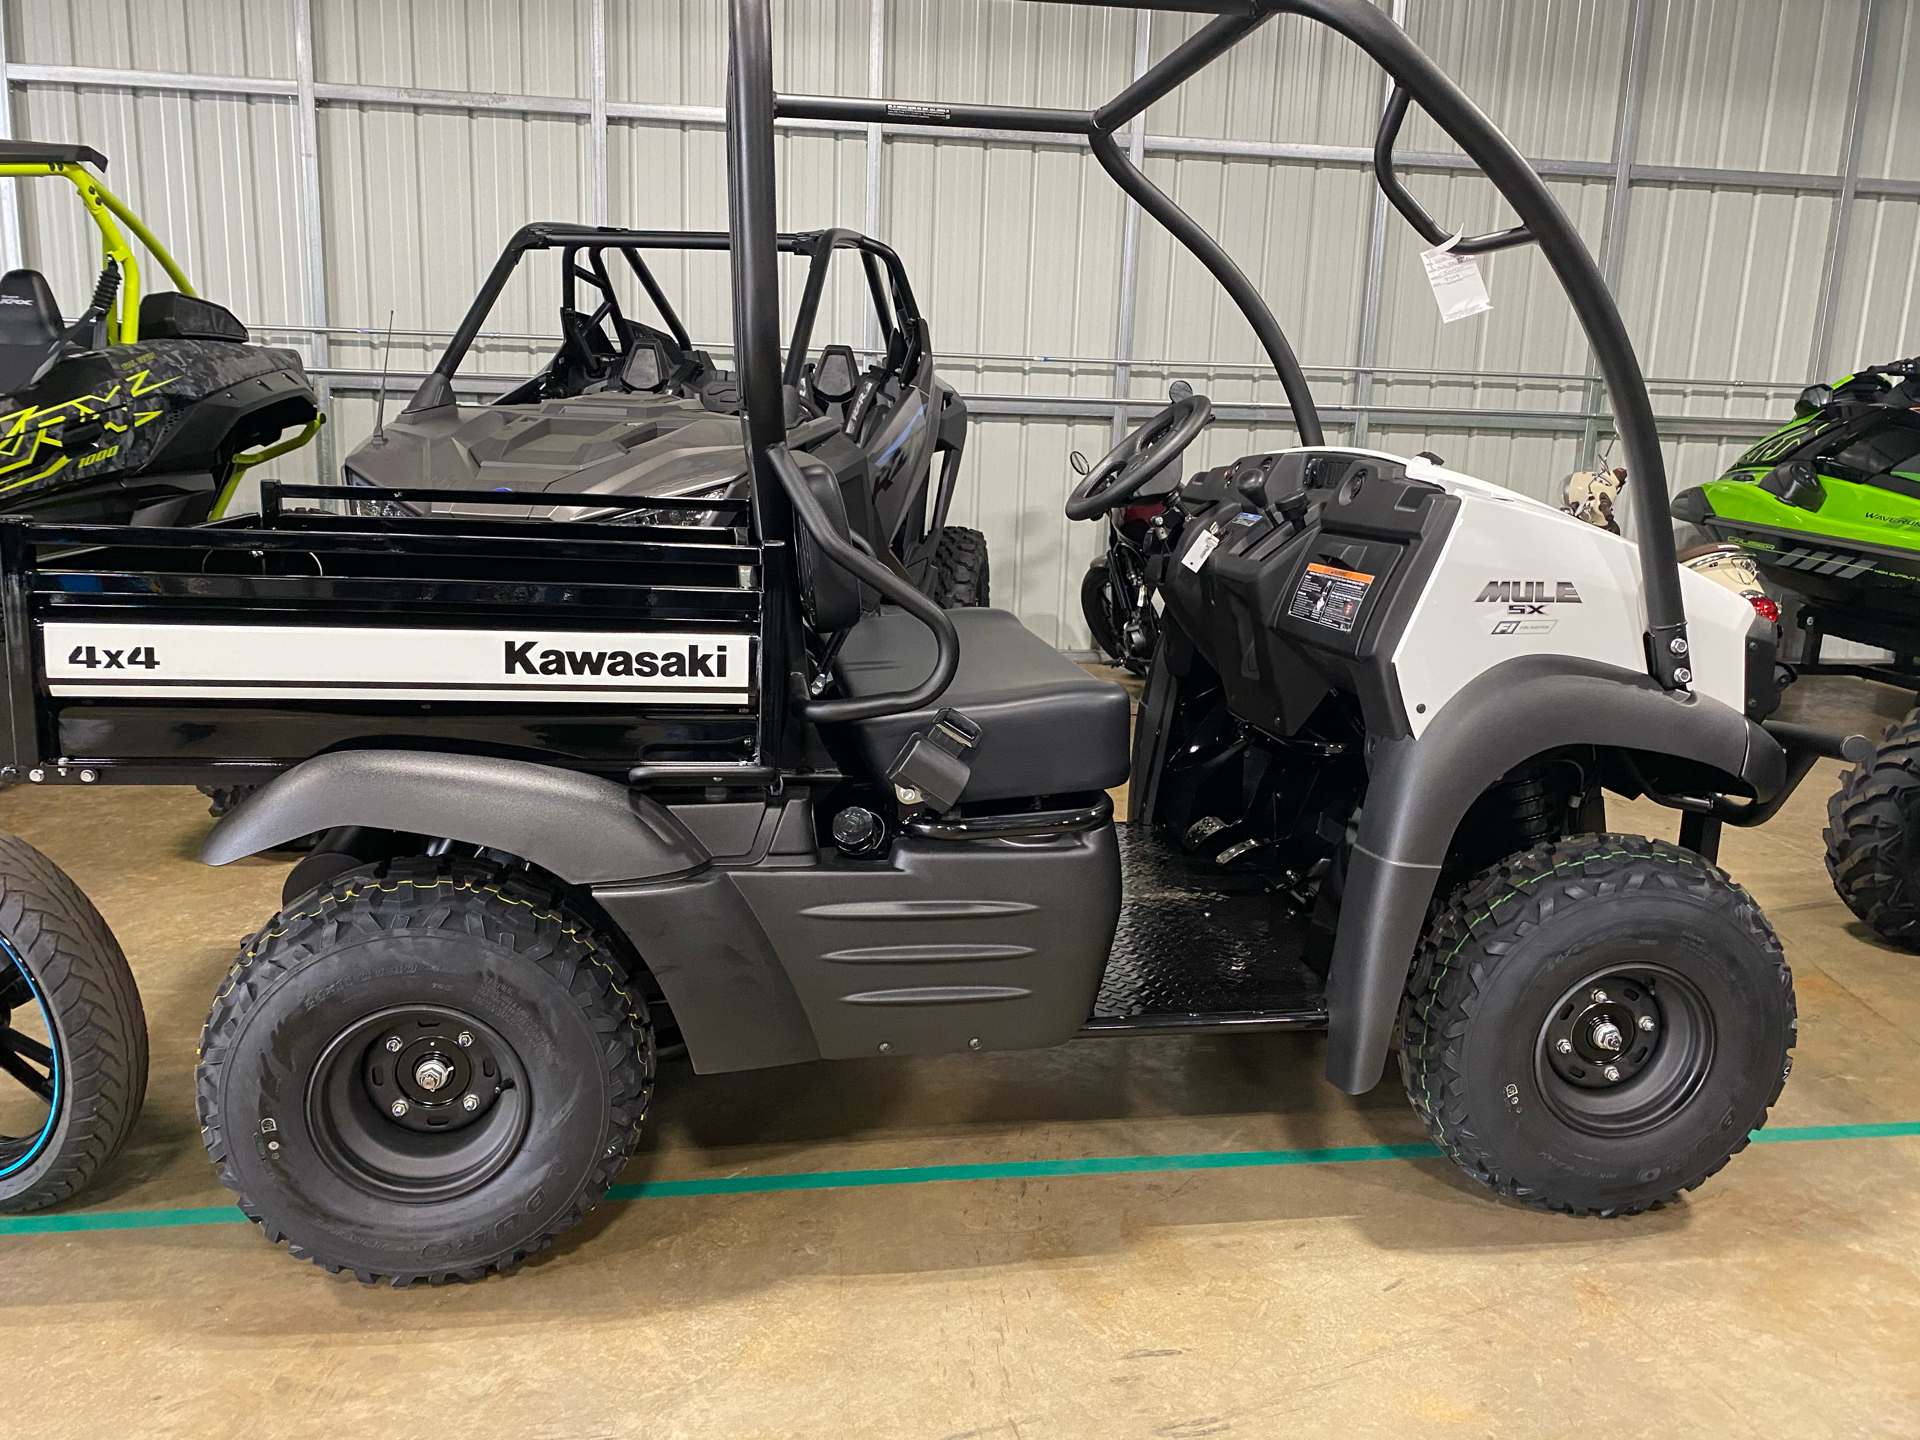 New 2021 Kawasaki Mule SX SE Vehicles in Statesville, NC | Stock Number: 501424 - greatwesternmotorcycles.com